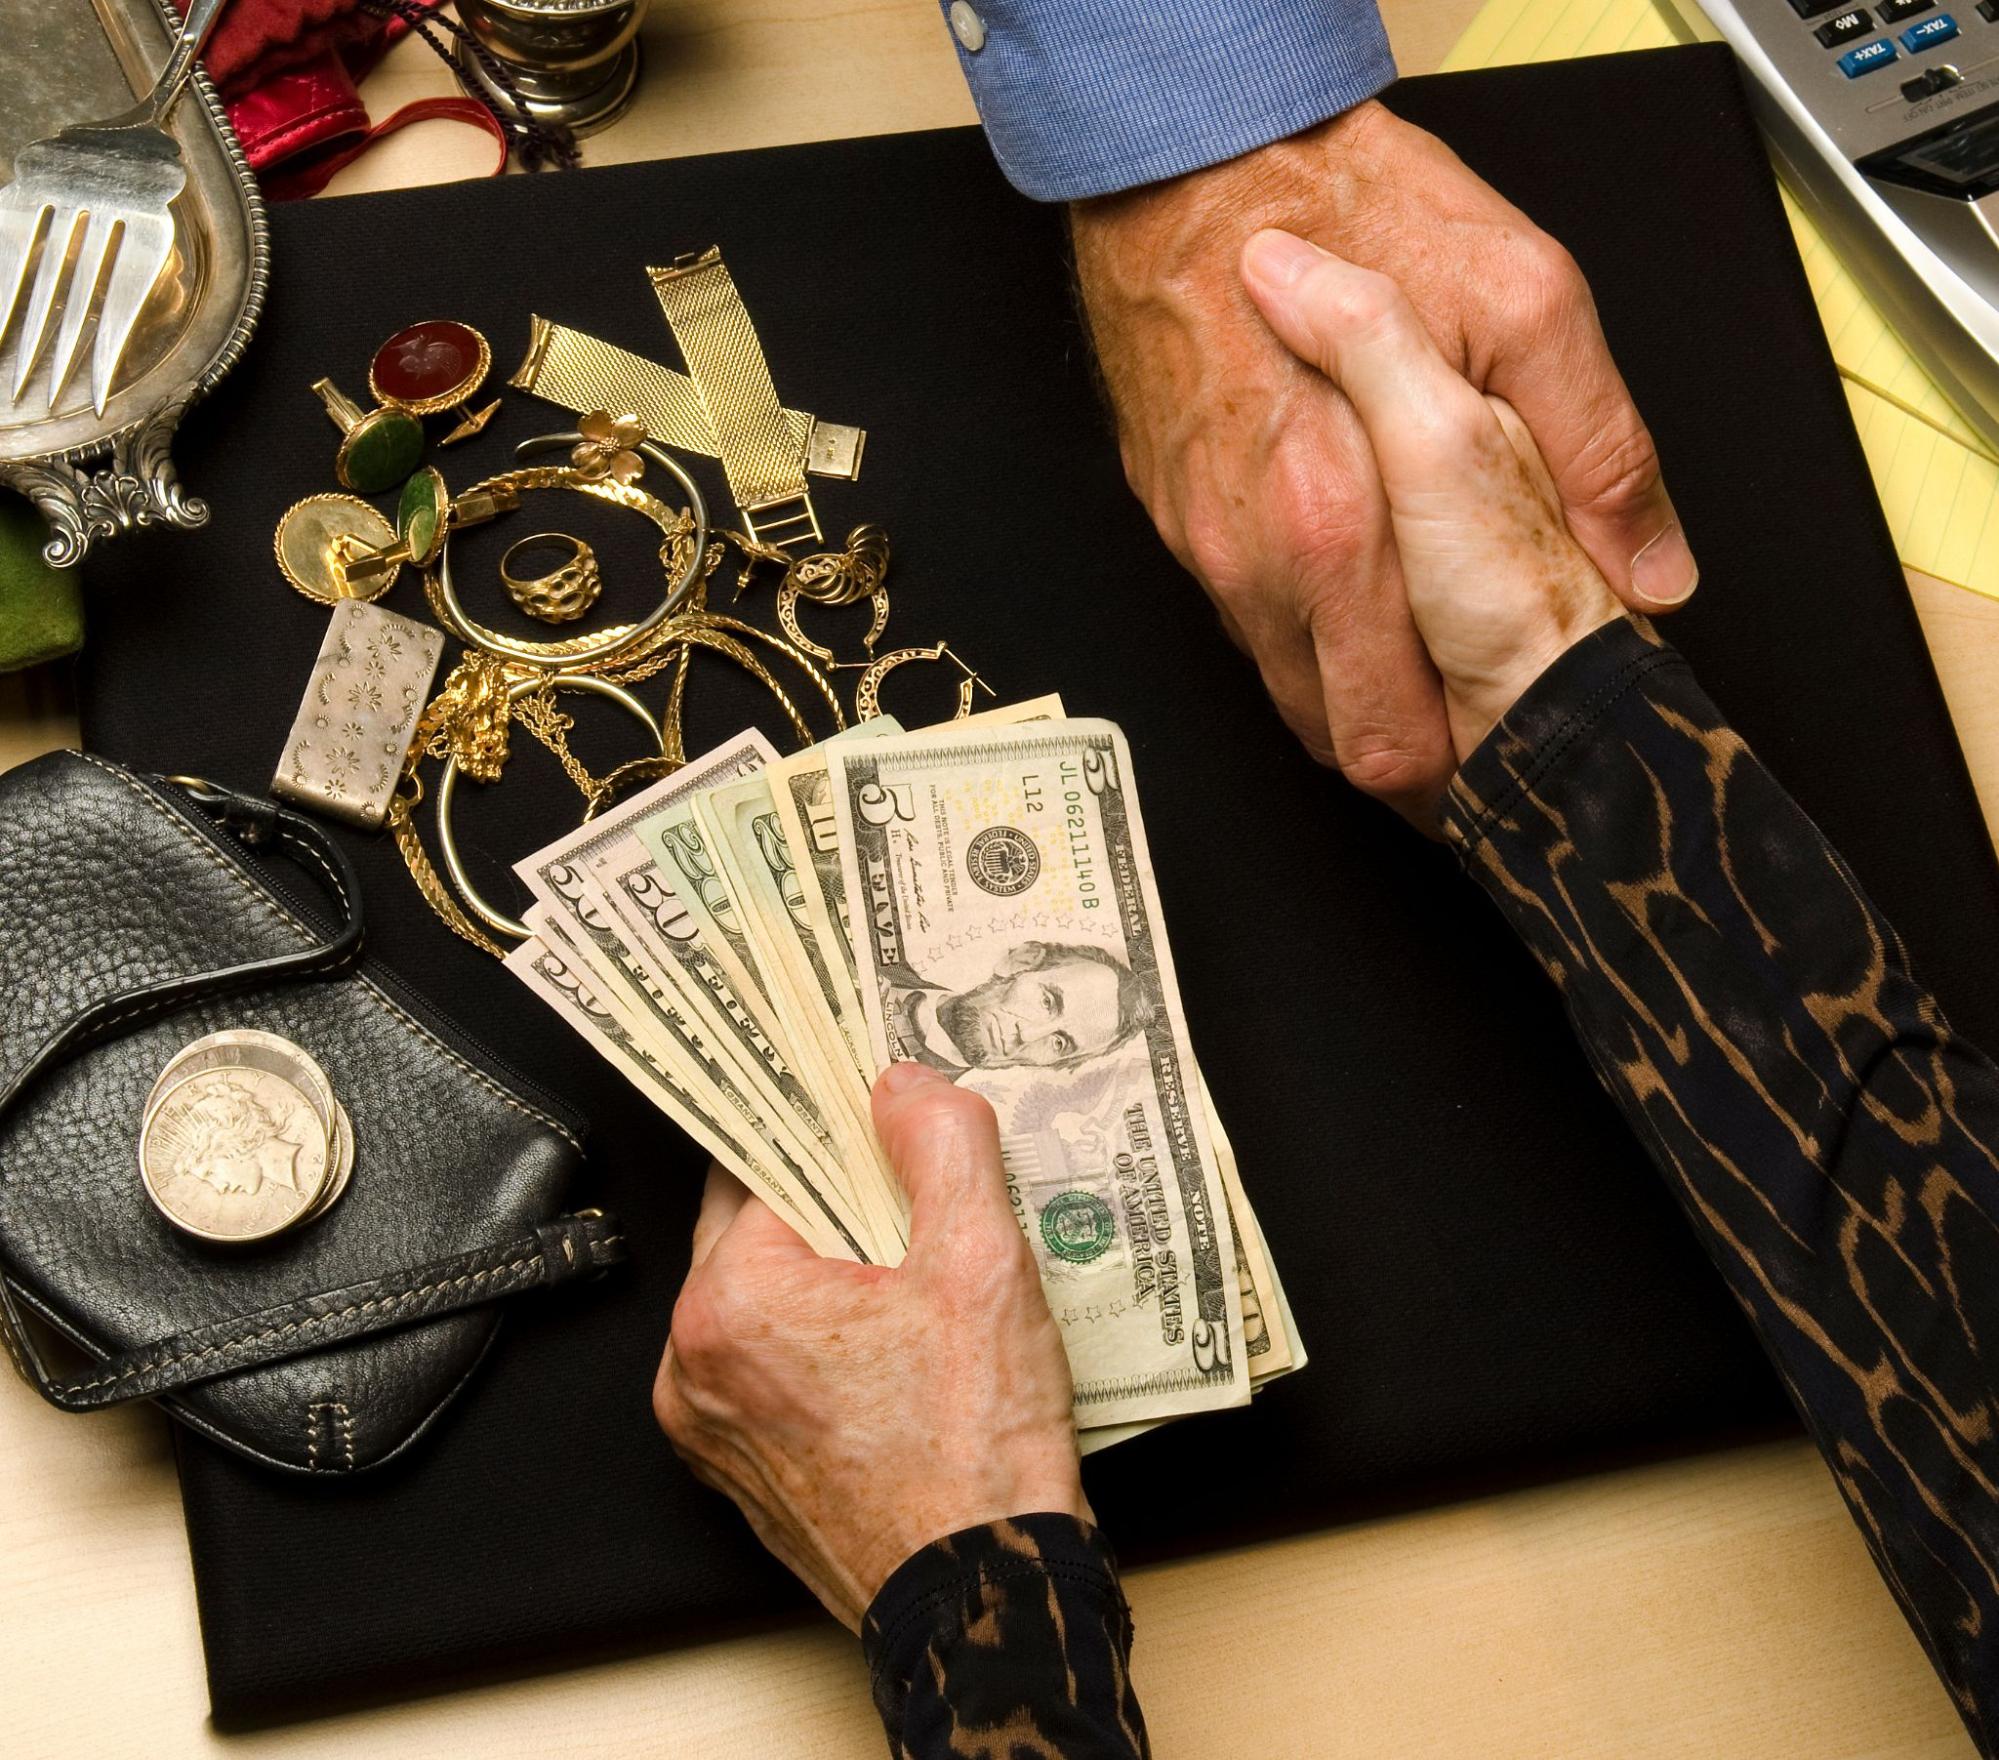 A woman shakes hands with a jewelry buyer and accepts cash in exchange for her gold jewelry